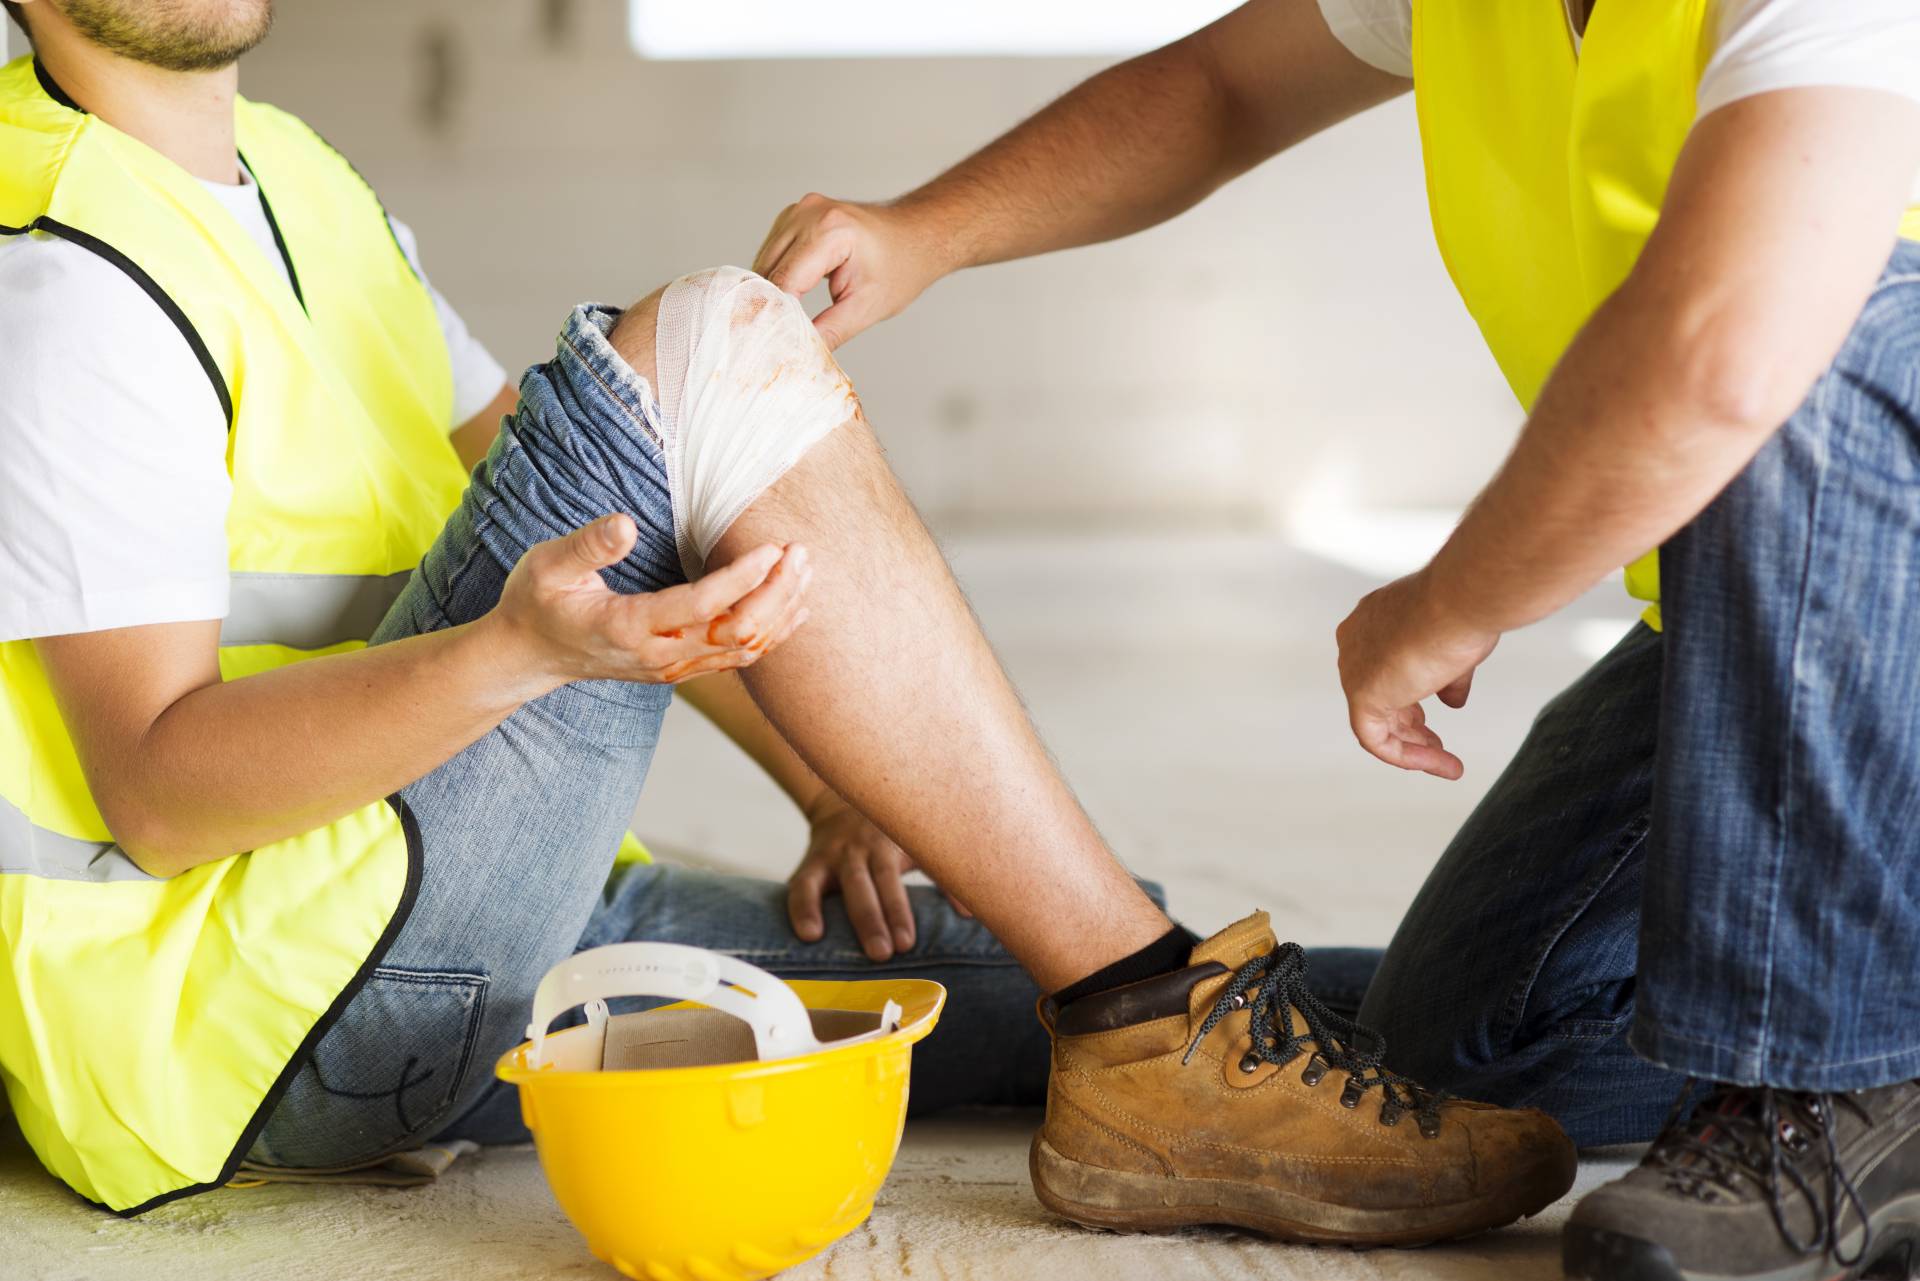 Hurt on the job? Visit an Angell Law Firm Personal Injury Lawyer for a free consultation.